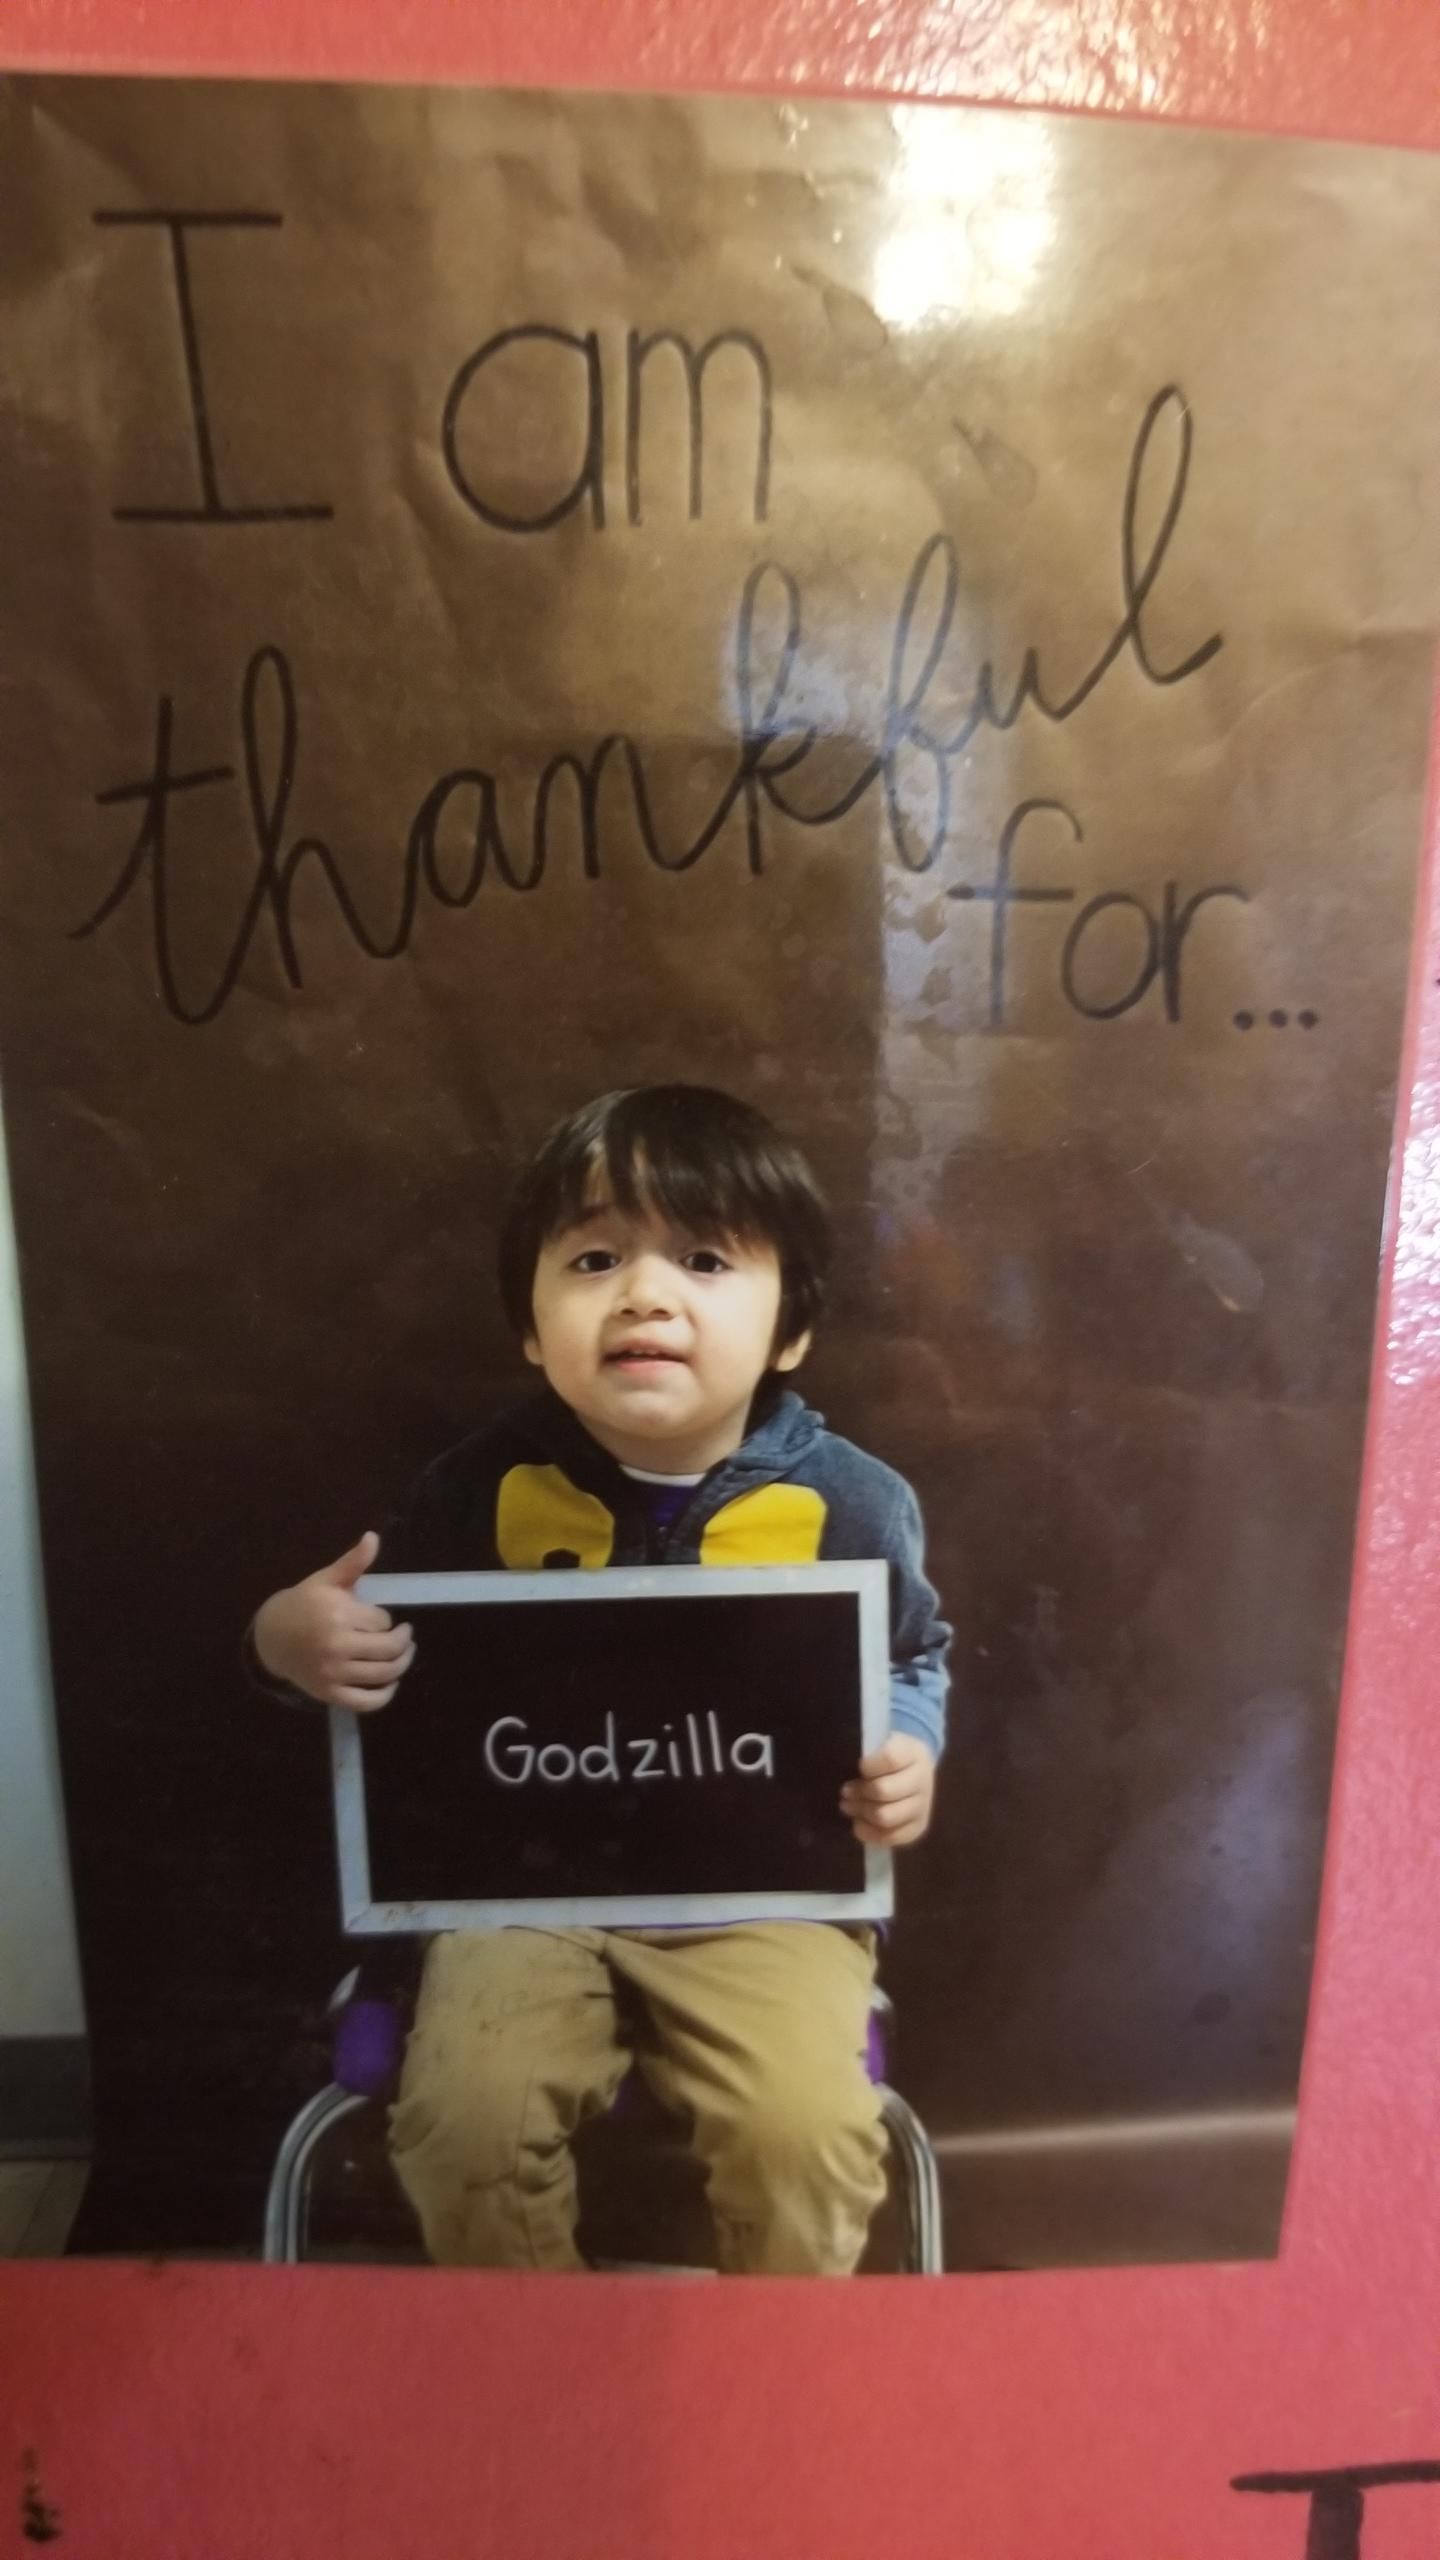 For Thanksgiving they asked my son what he was thankful for...